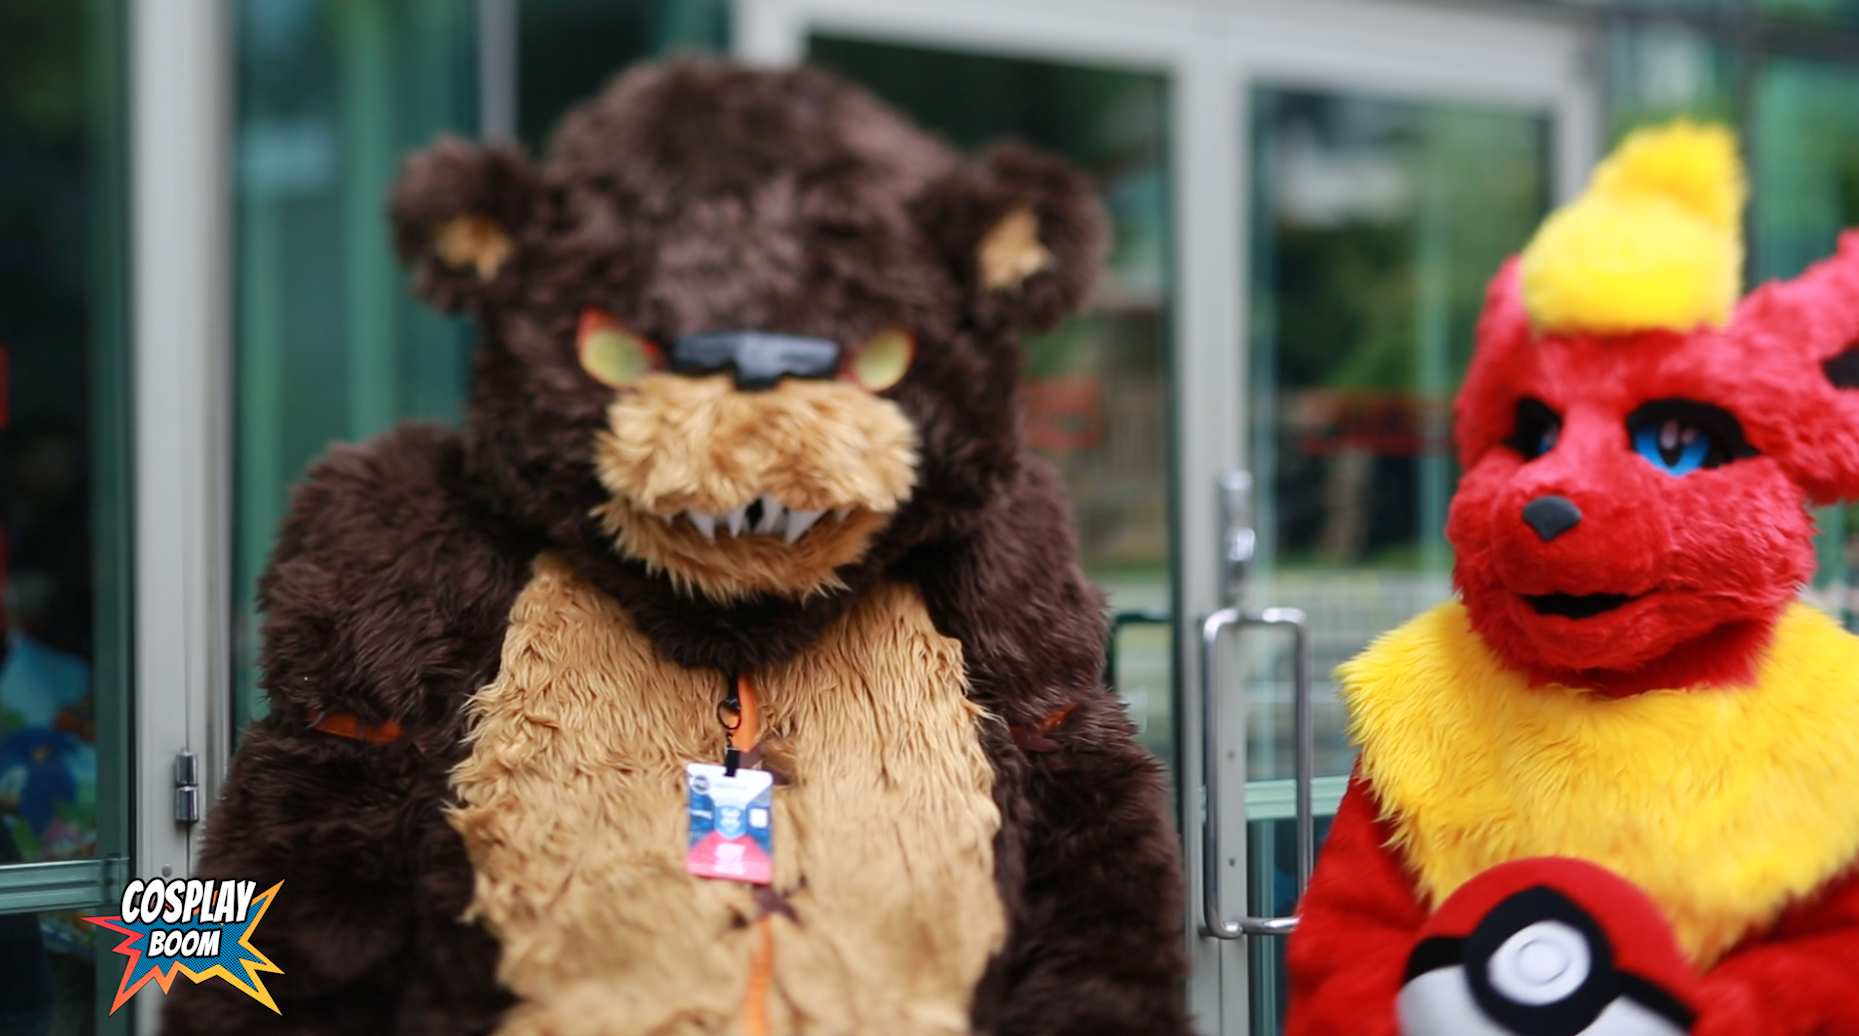 The Coolest Cosplay At PAX Prime, Day 1